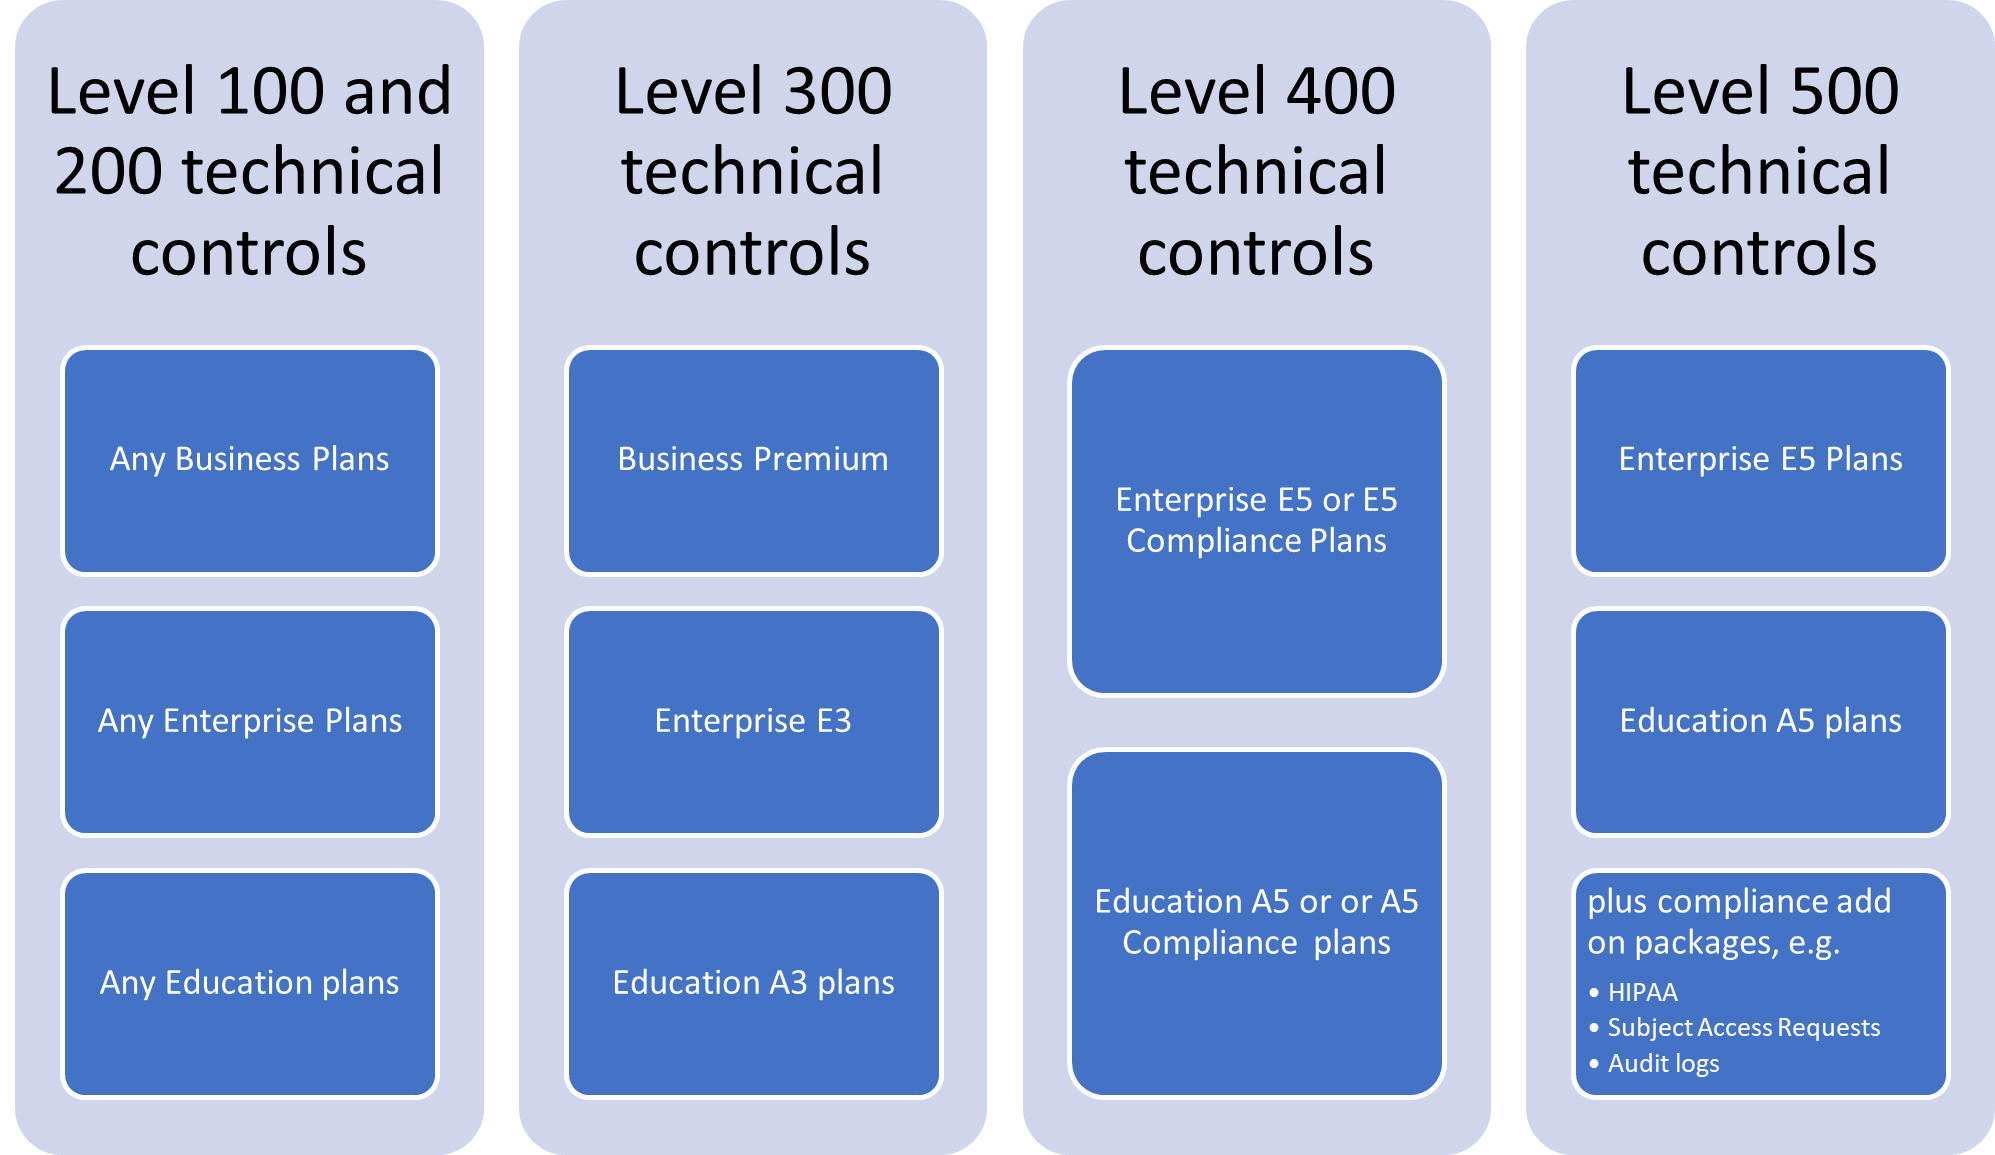 Governance, Risk, and Compliance technical controls